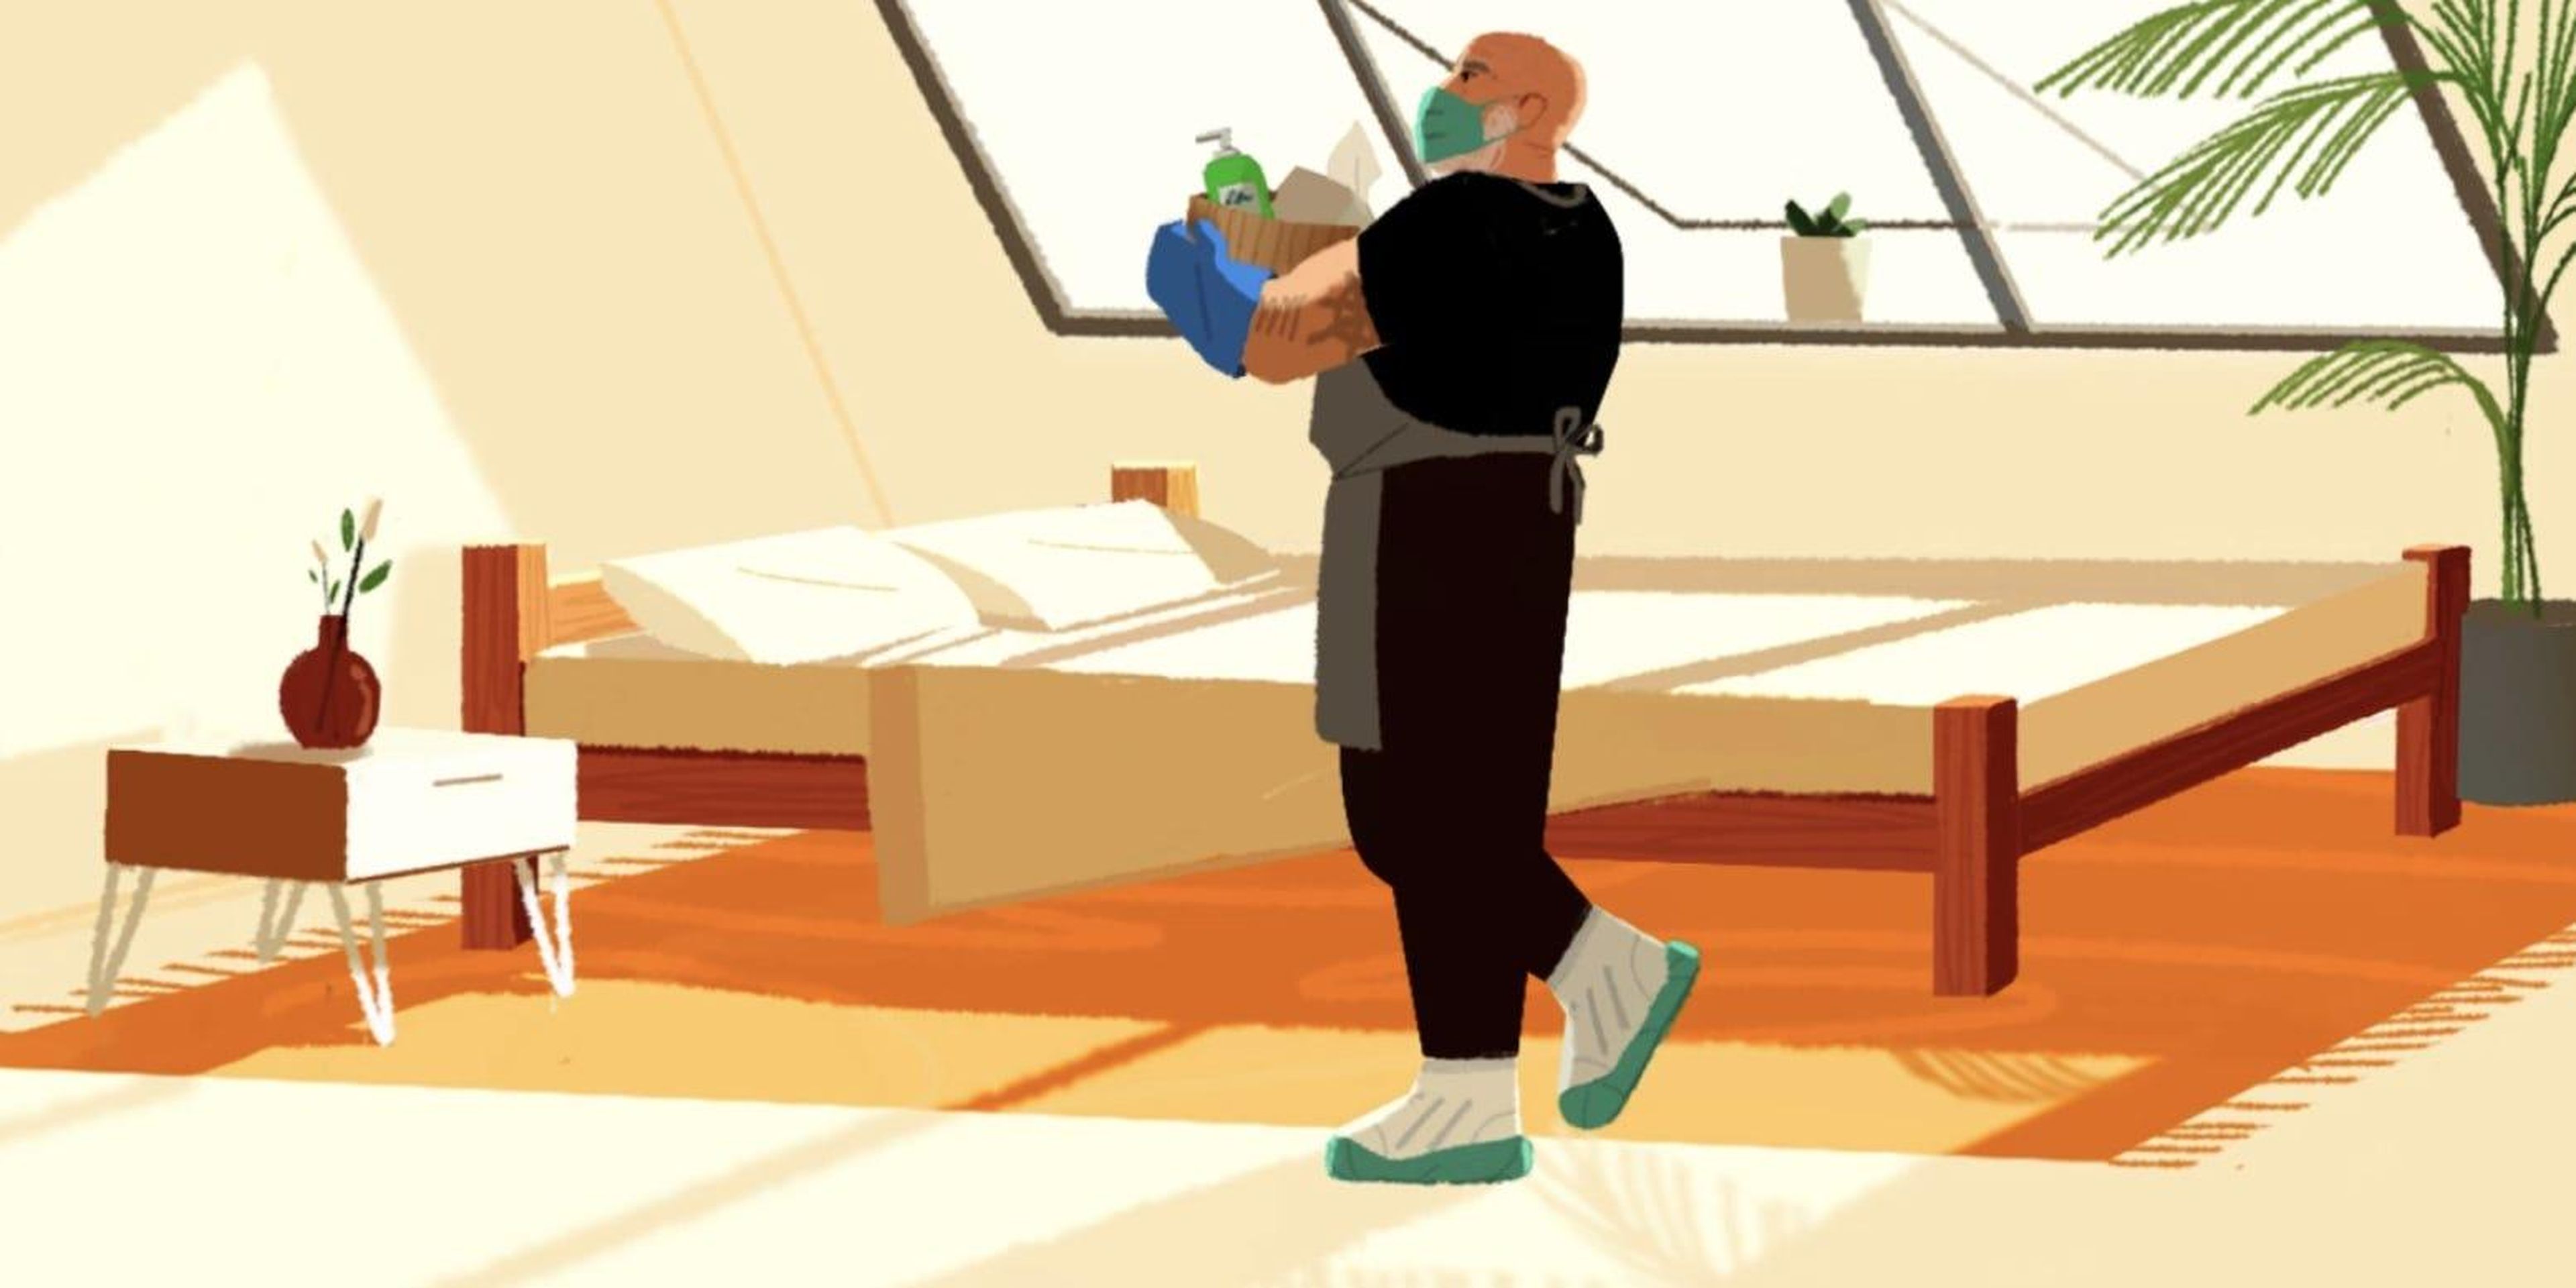 An illustration accompanying Airbnb's new cleaning guidelines for hosts. Airbnb